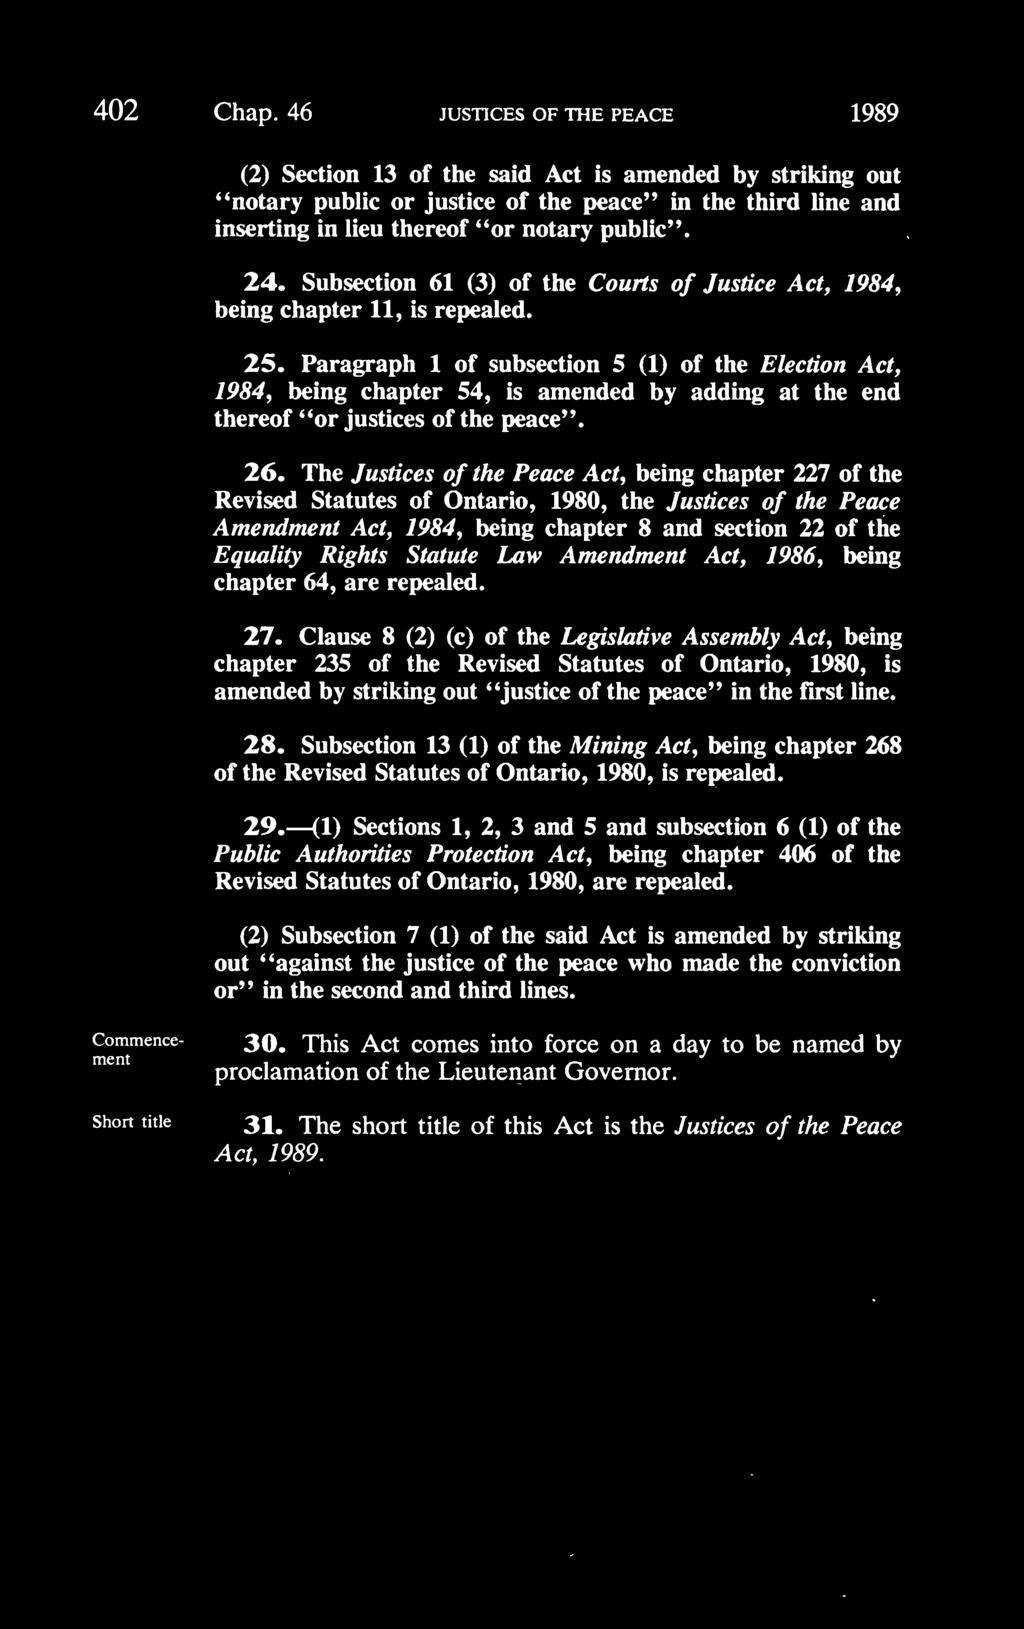 24. Subsection 61 (3) of the Courts of Justice Act, 1984, being chapter 11, is repealed. 25.